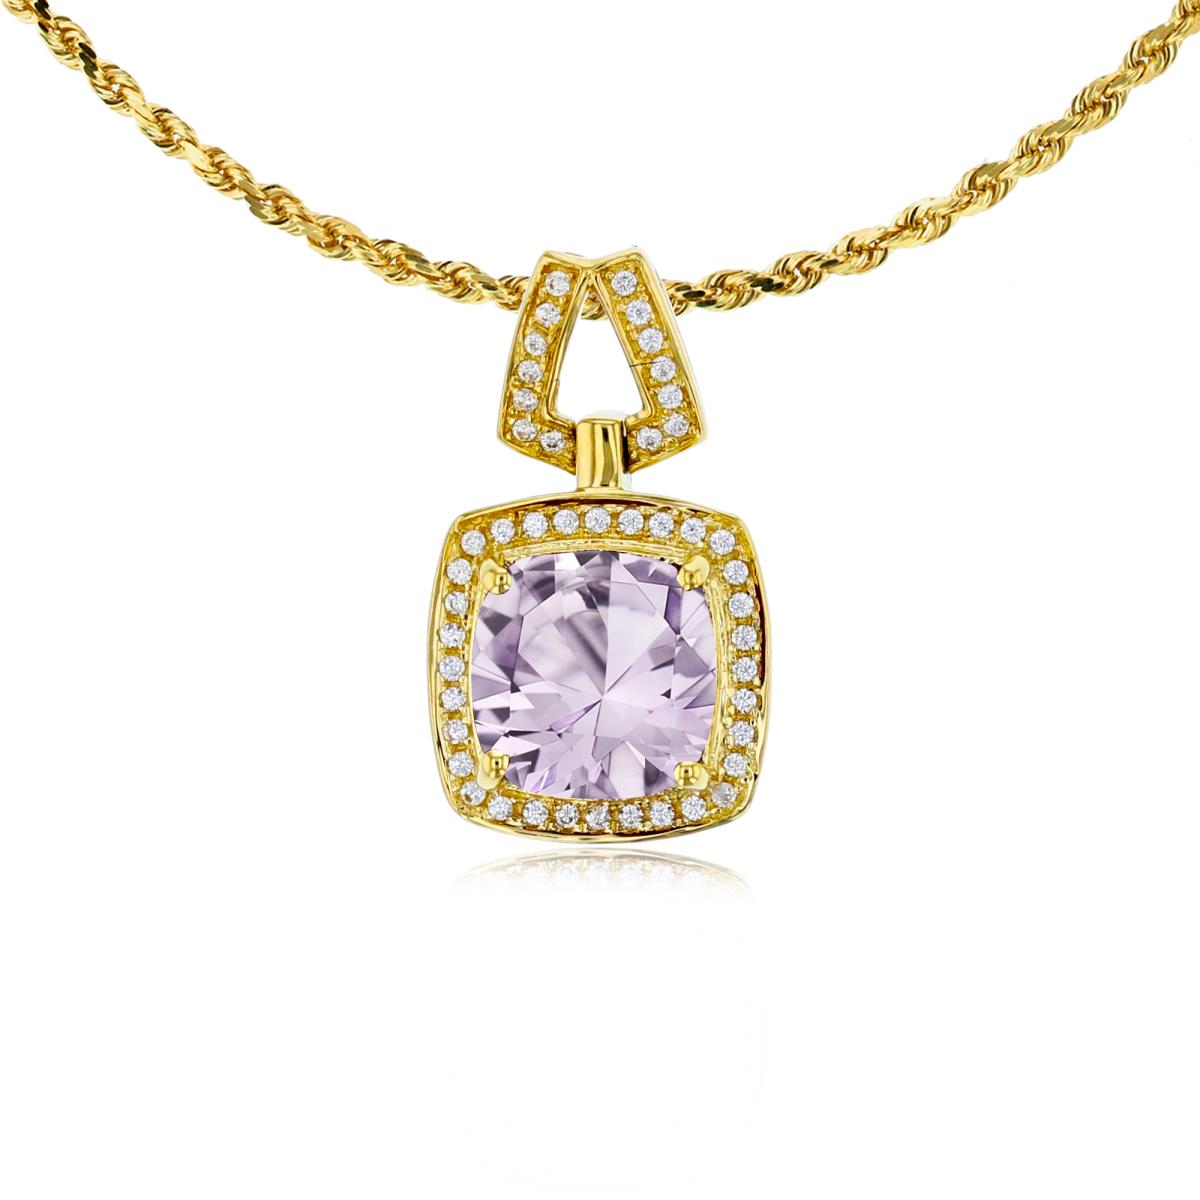 10K Yellow Gold 7mm Cushion Rose De France & 0.10 CTTW Diamond Halo 18" Rope Chain Necklace